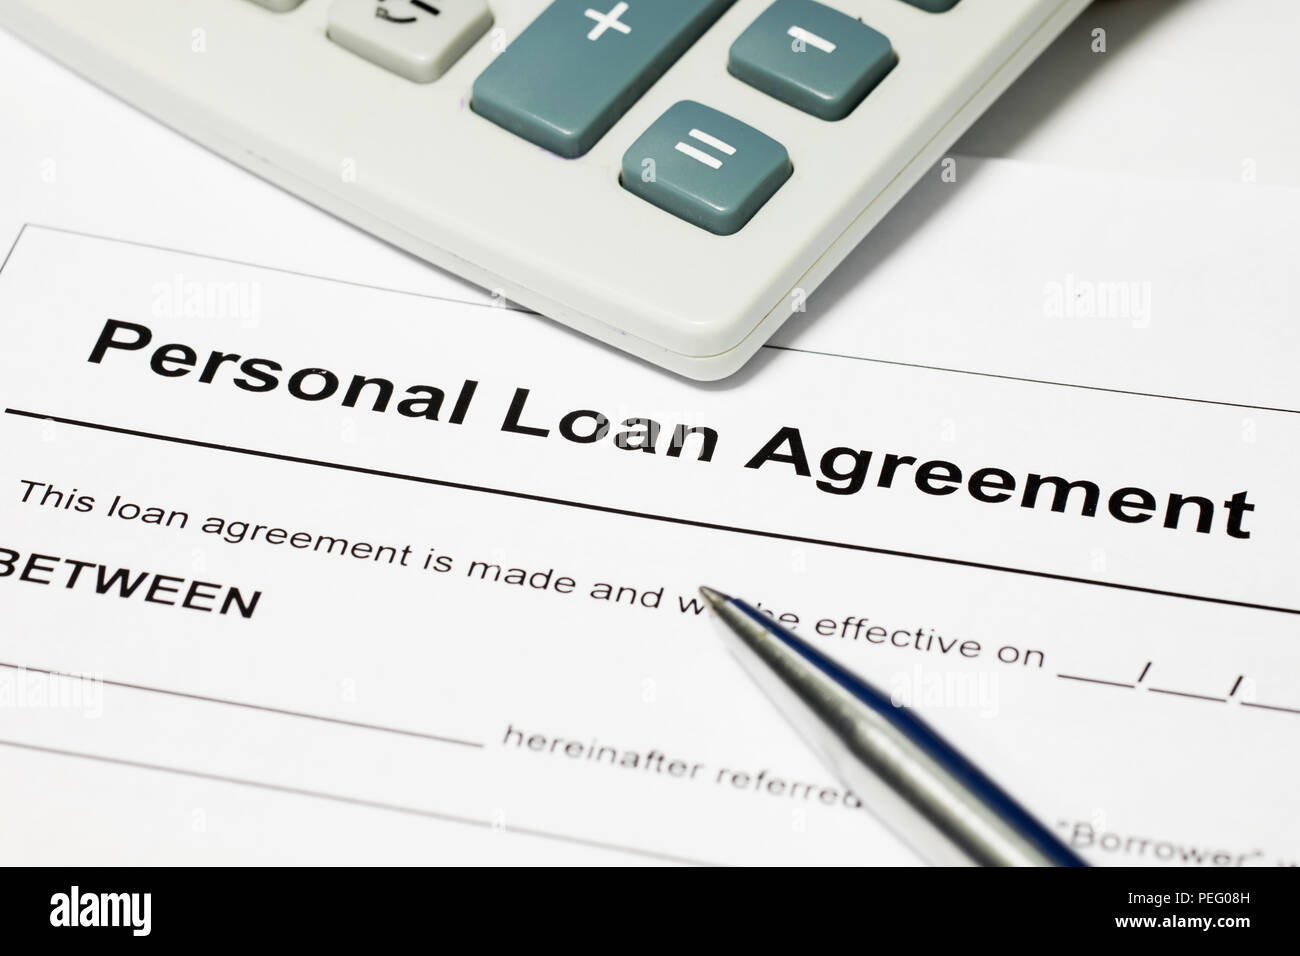 Personal loan agreement, pen and calculator Stock Photo - Alamy